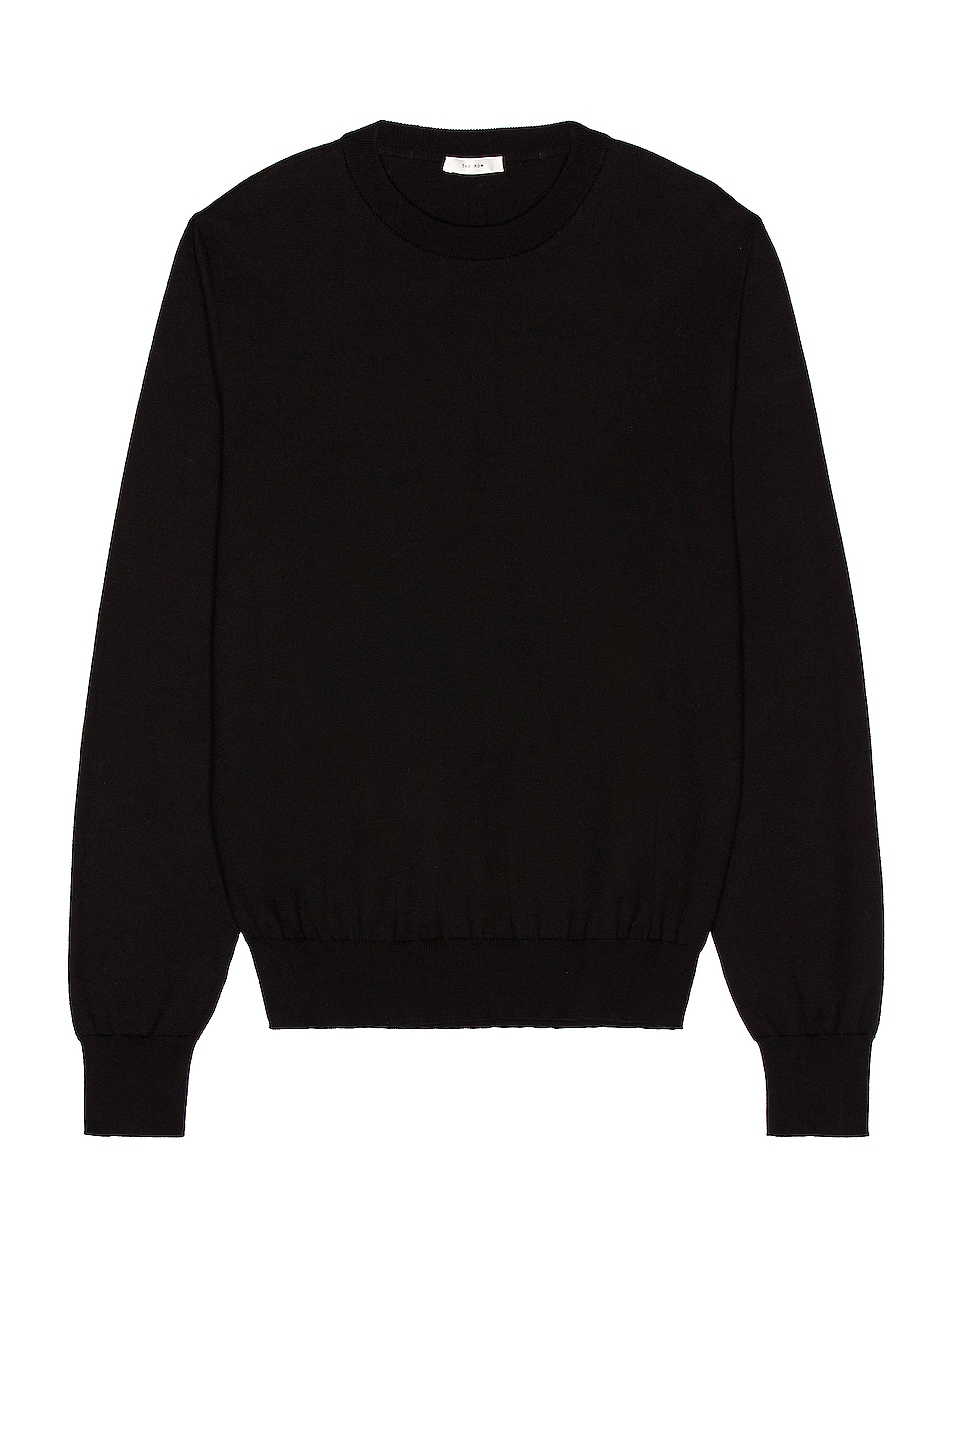 Image 1 of The Row Panetti Sweater in Black